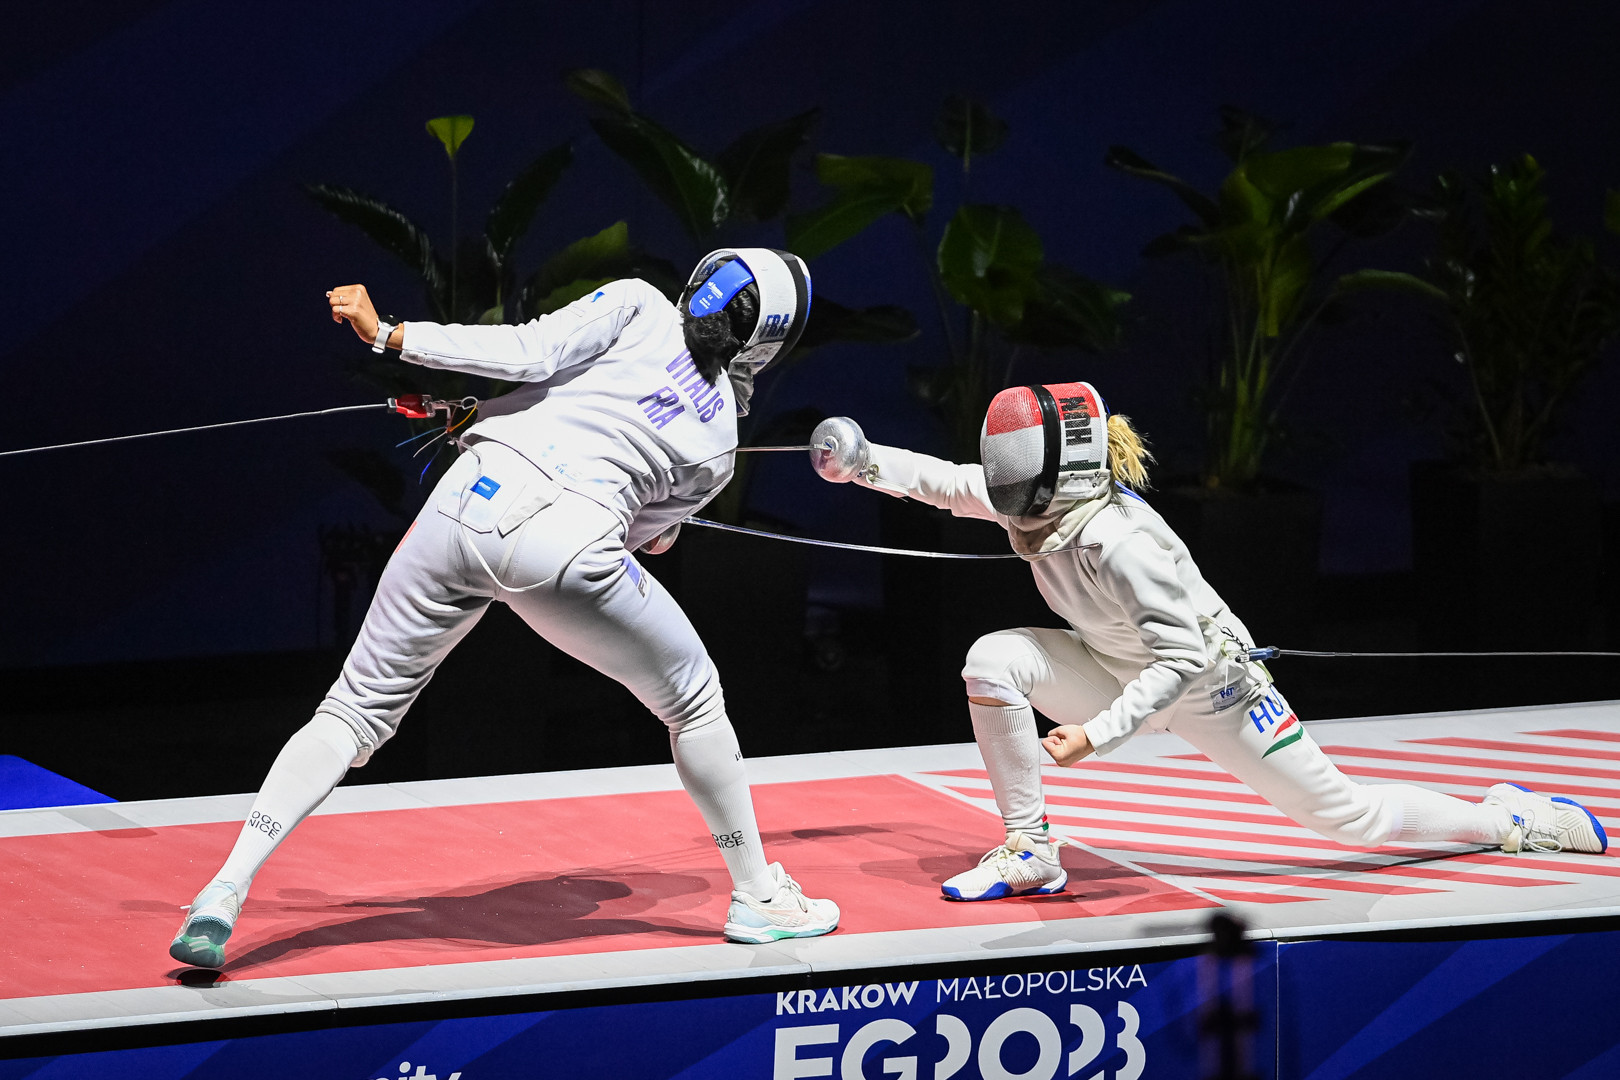 France took over the lead right at the last from Hungary to win the women's épée team title in European Games fencing today ©Kraków-Małopolska 2023 